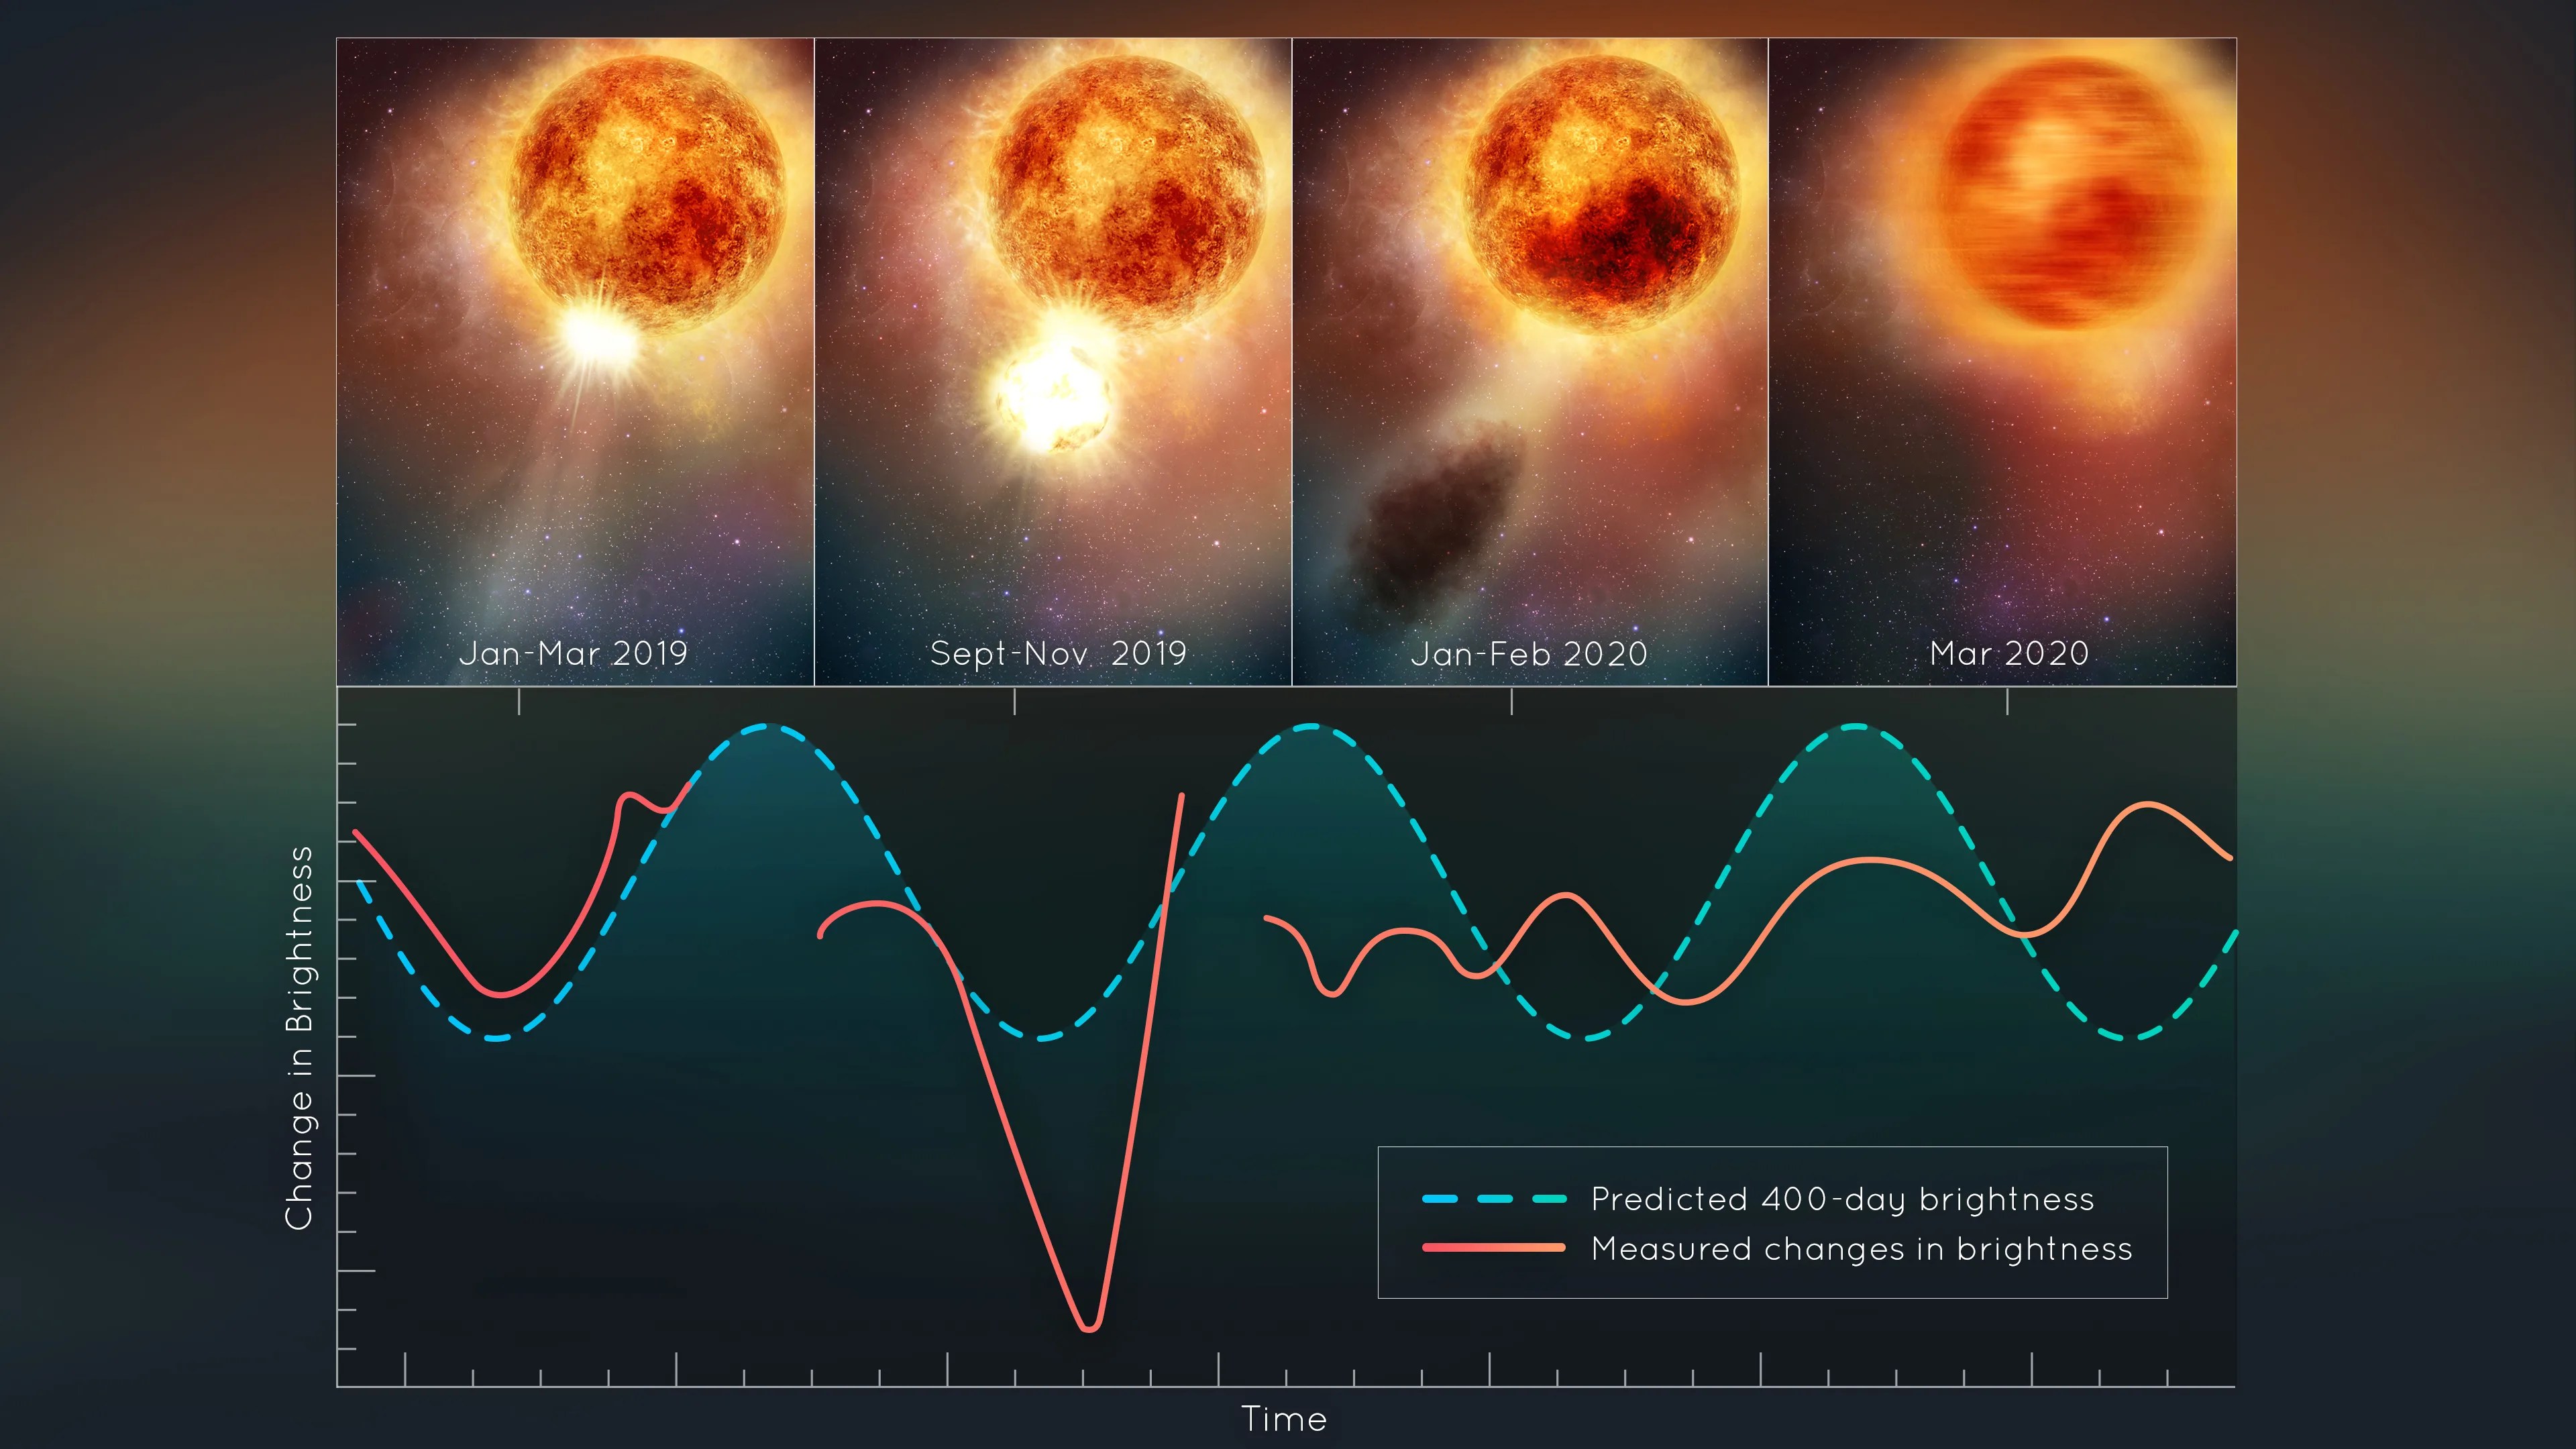 4 illustrations at top show mass ejecting from the star over time, January 2019 to March 2020. Bottom of the image is a graph that plots the star's change in brightness over time.